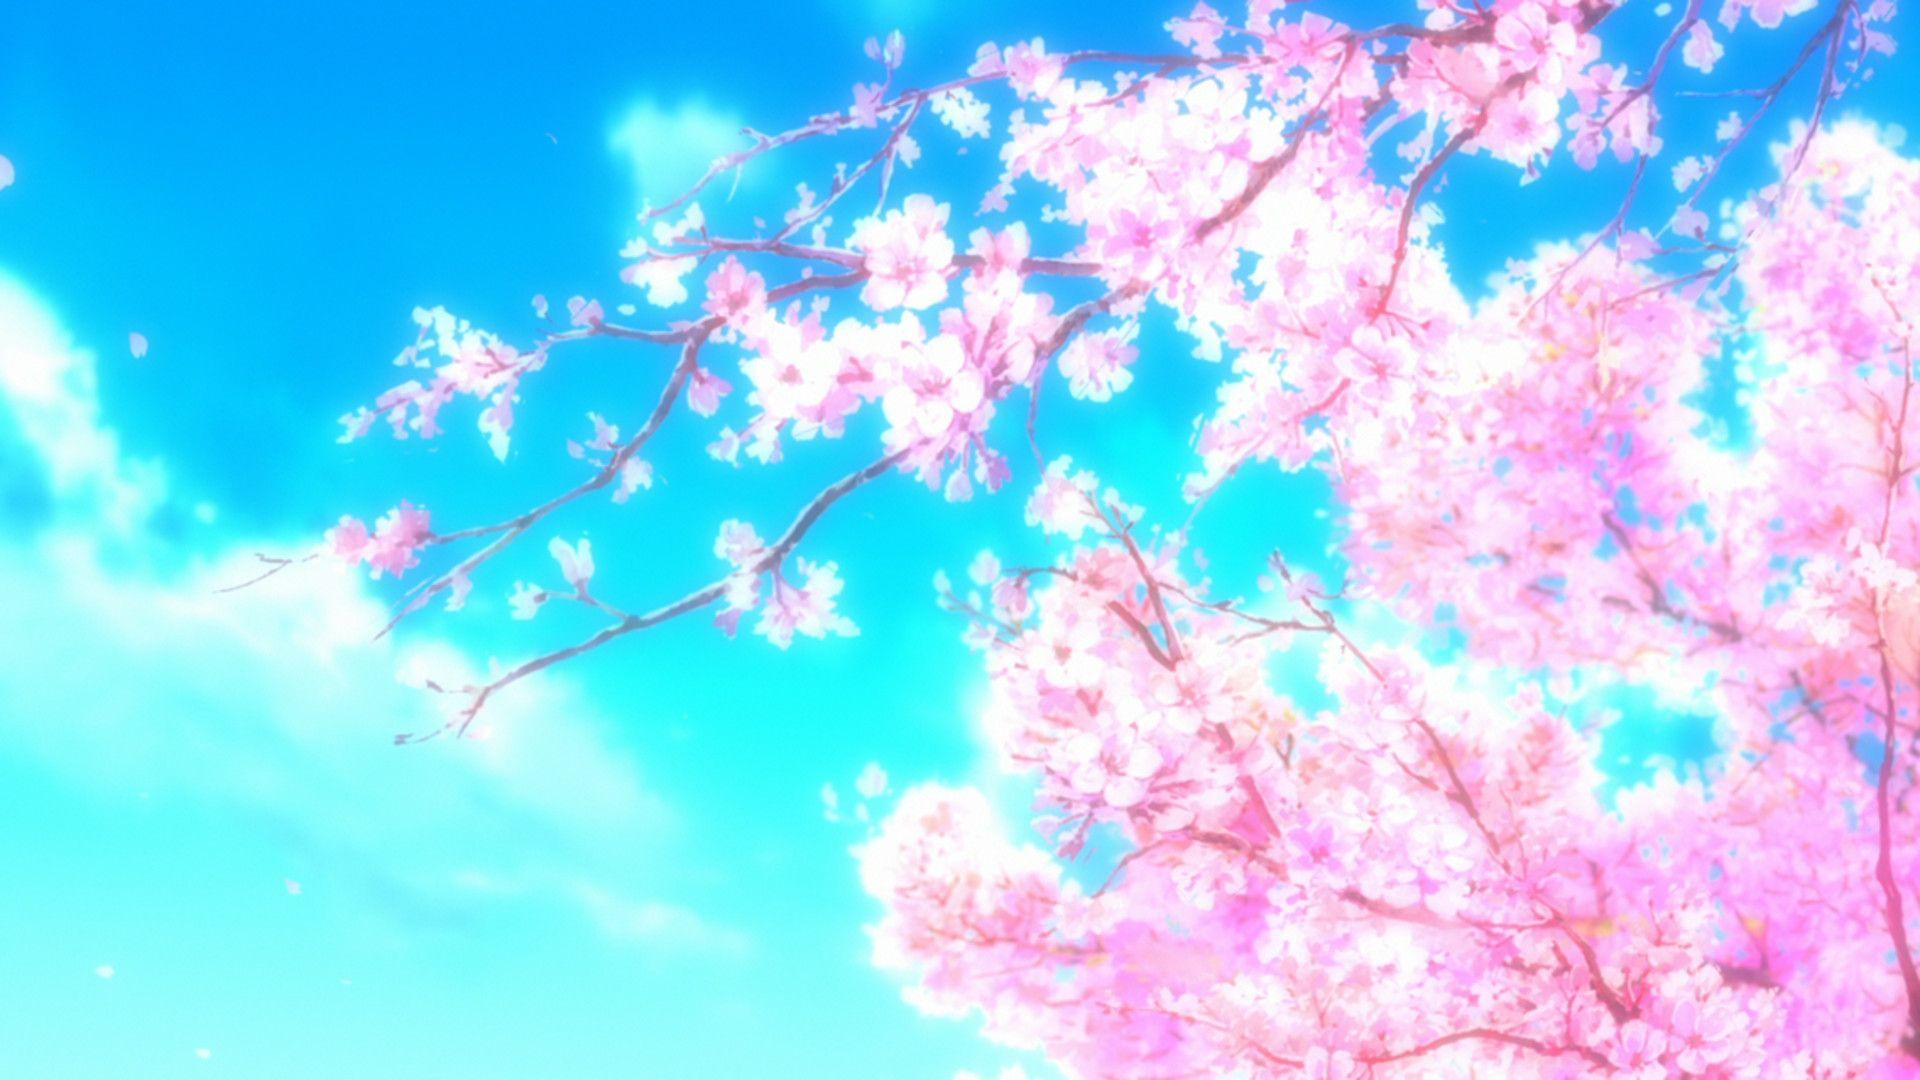 Anime Cherry Blossom Wallpapers - Wallpaper Cave